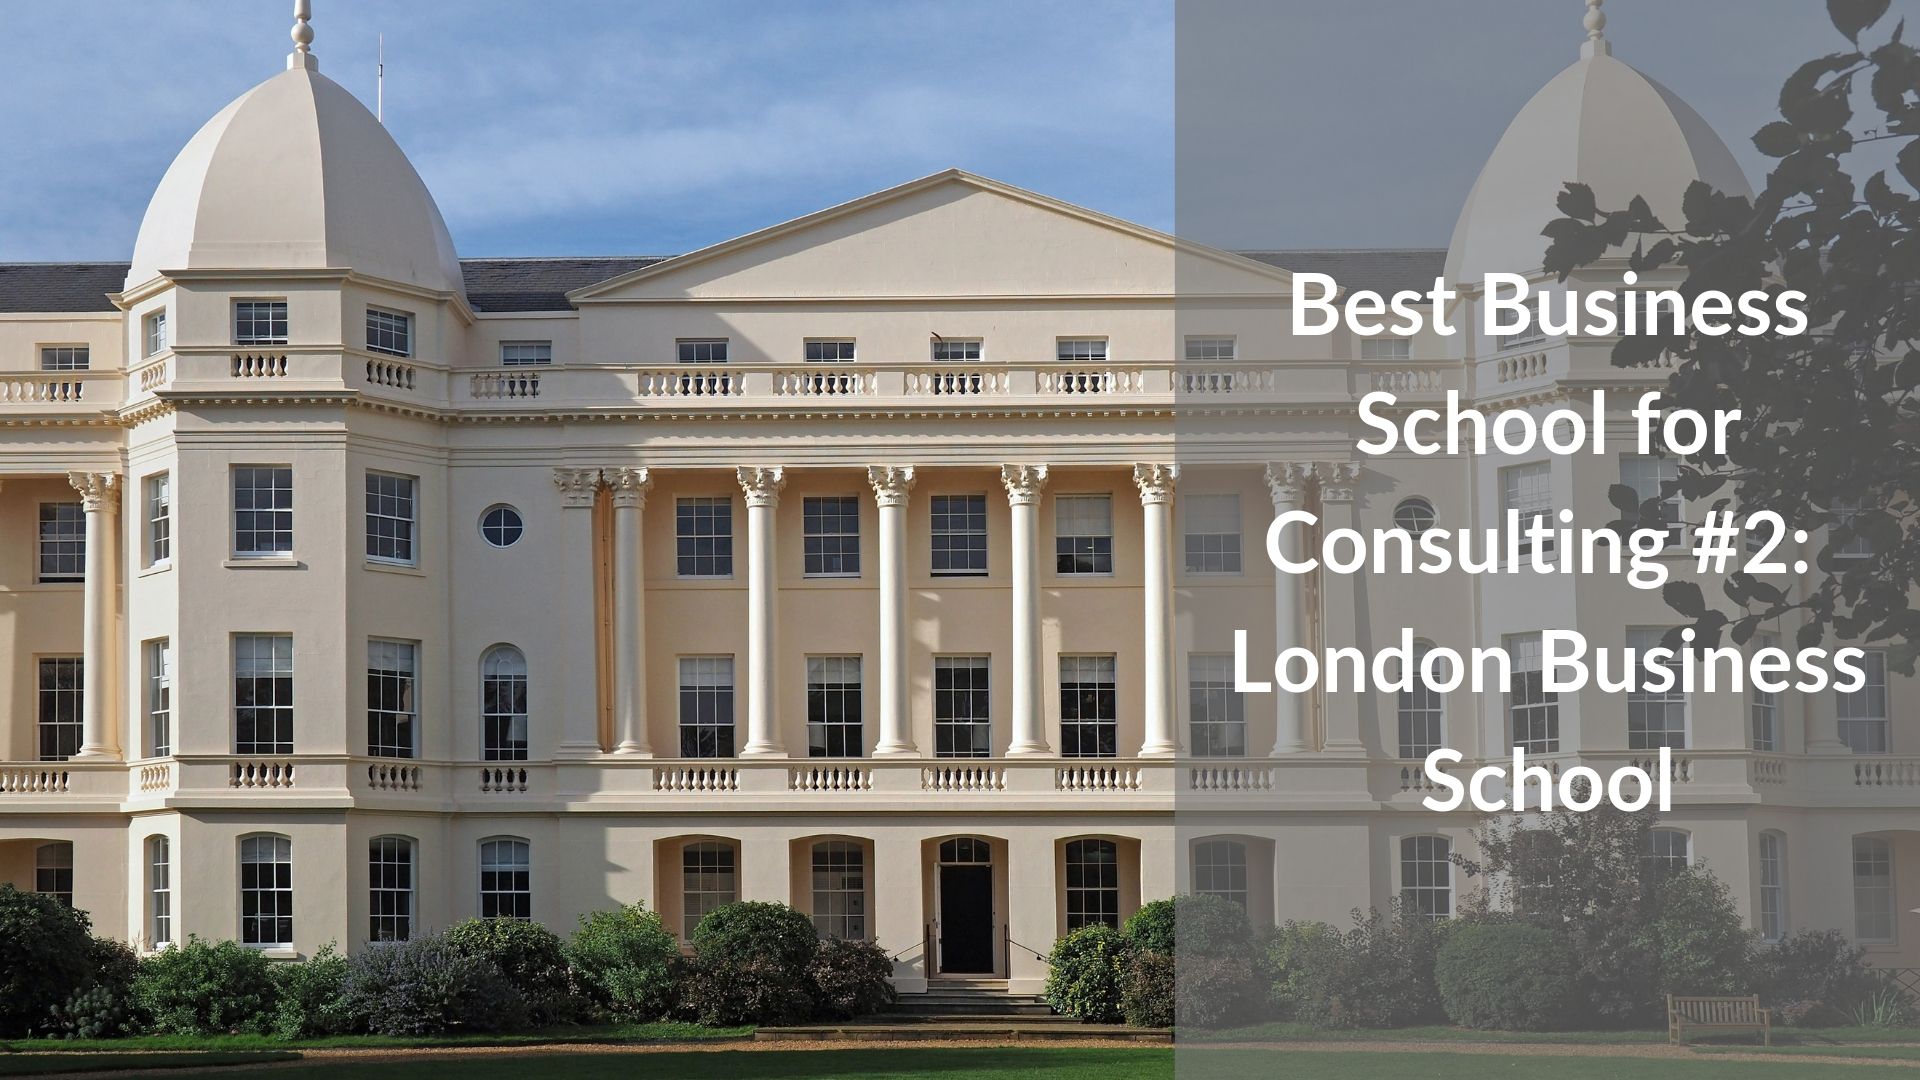 Best Business School for Consulting #2 - London Business School